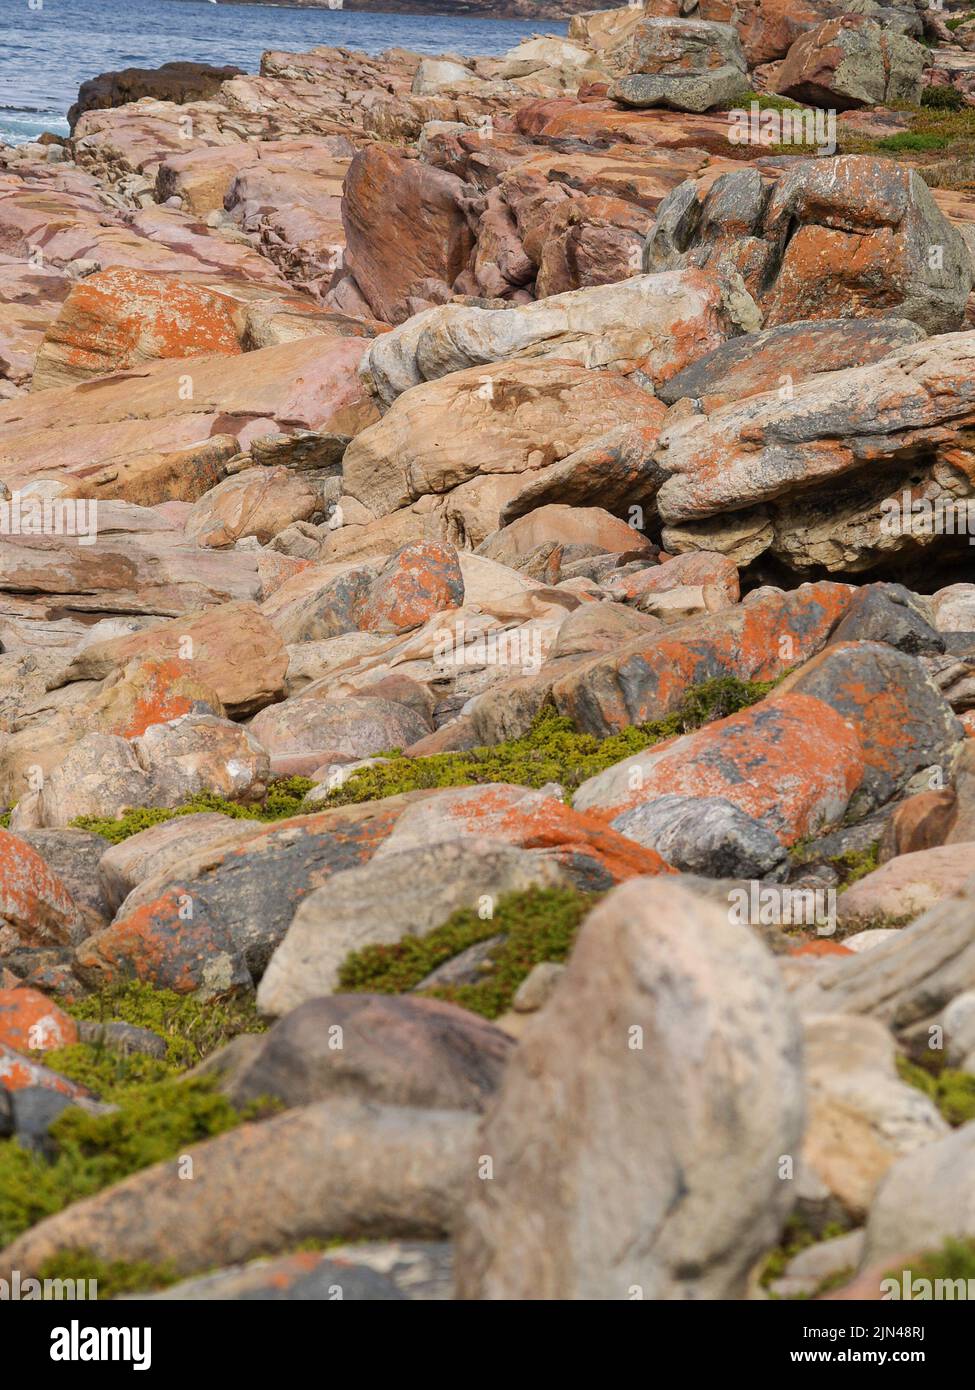 Rocks and large boulders on coastal edge at Cape of Good Hope, South Africa. Stock Photo